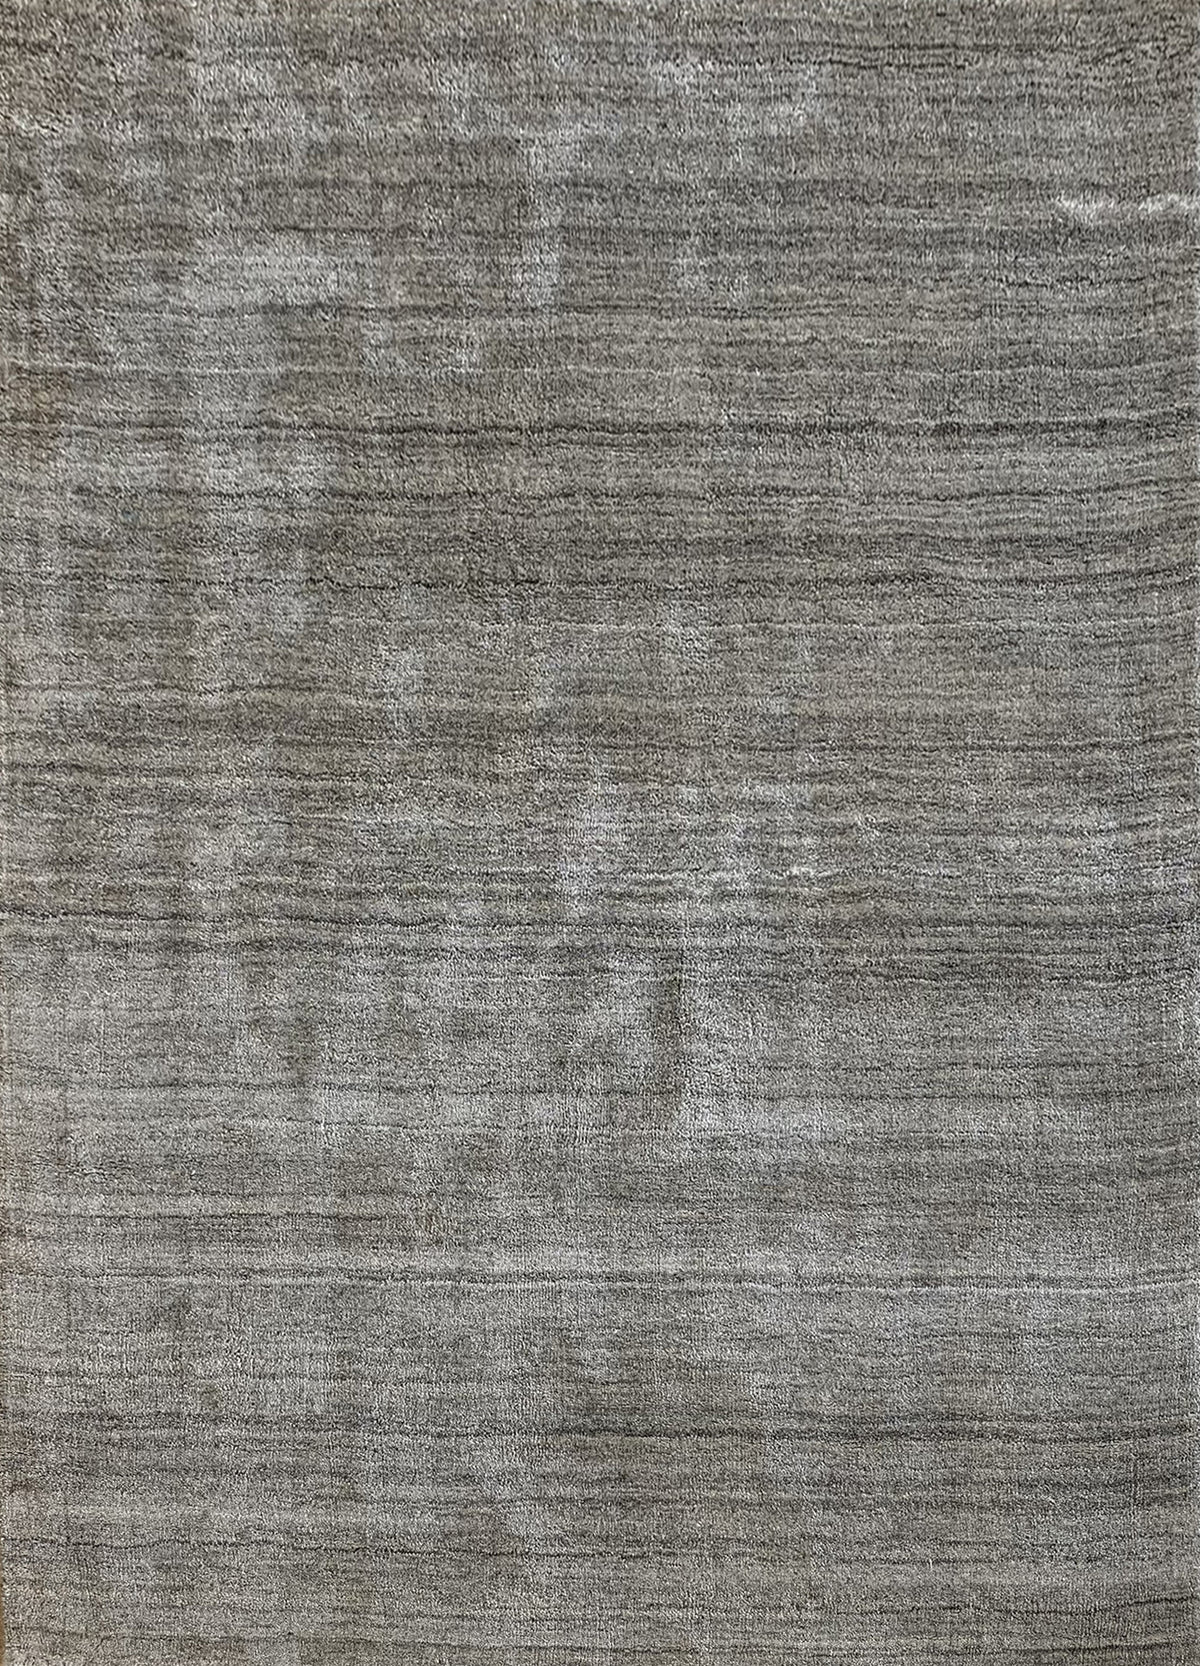 Rugslane Silver Plain Textured Wool &Viscose Mix Loom Knotted Carpet 4.6ft X 6.6ft